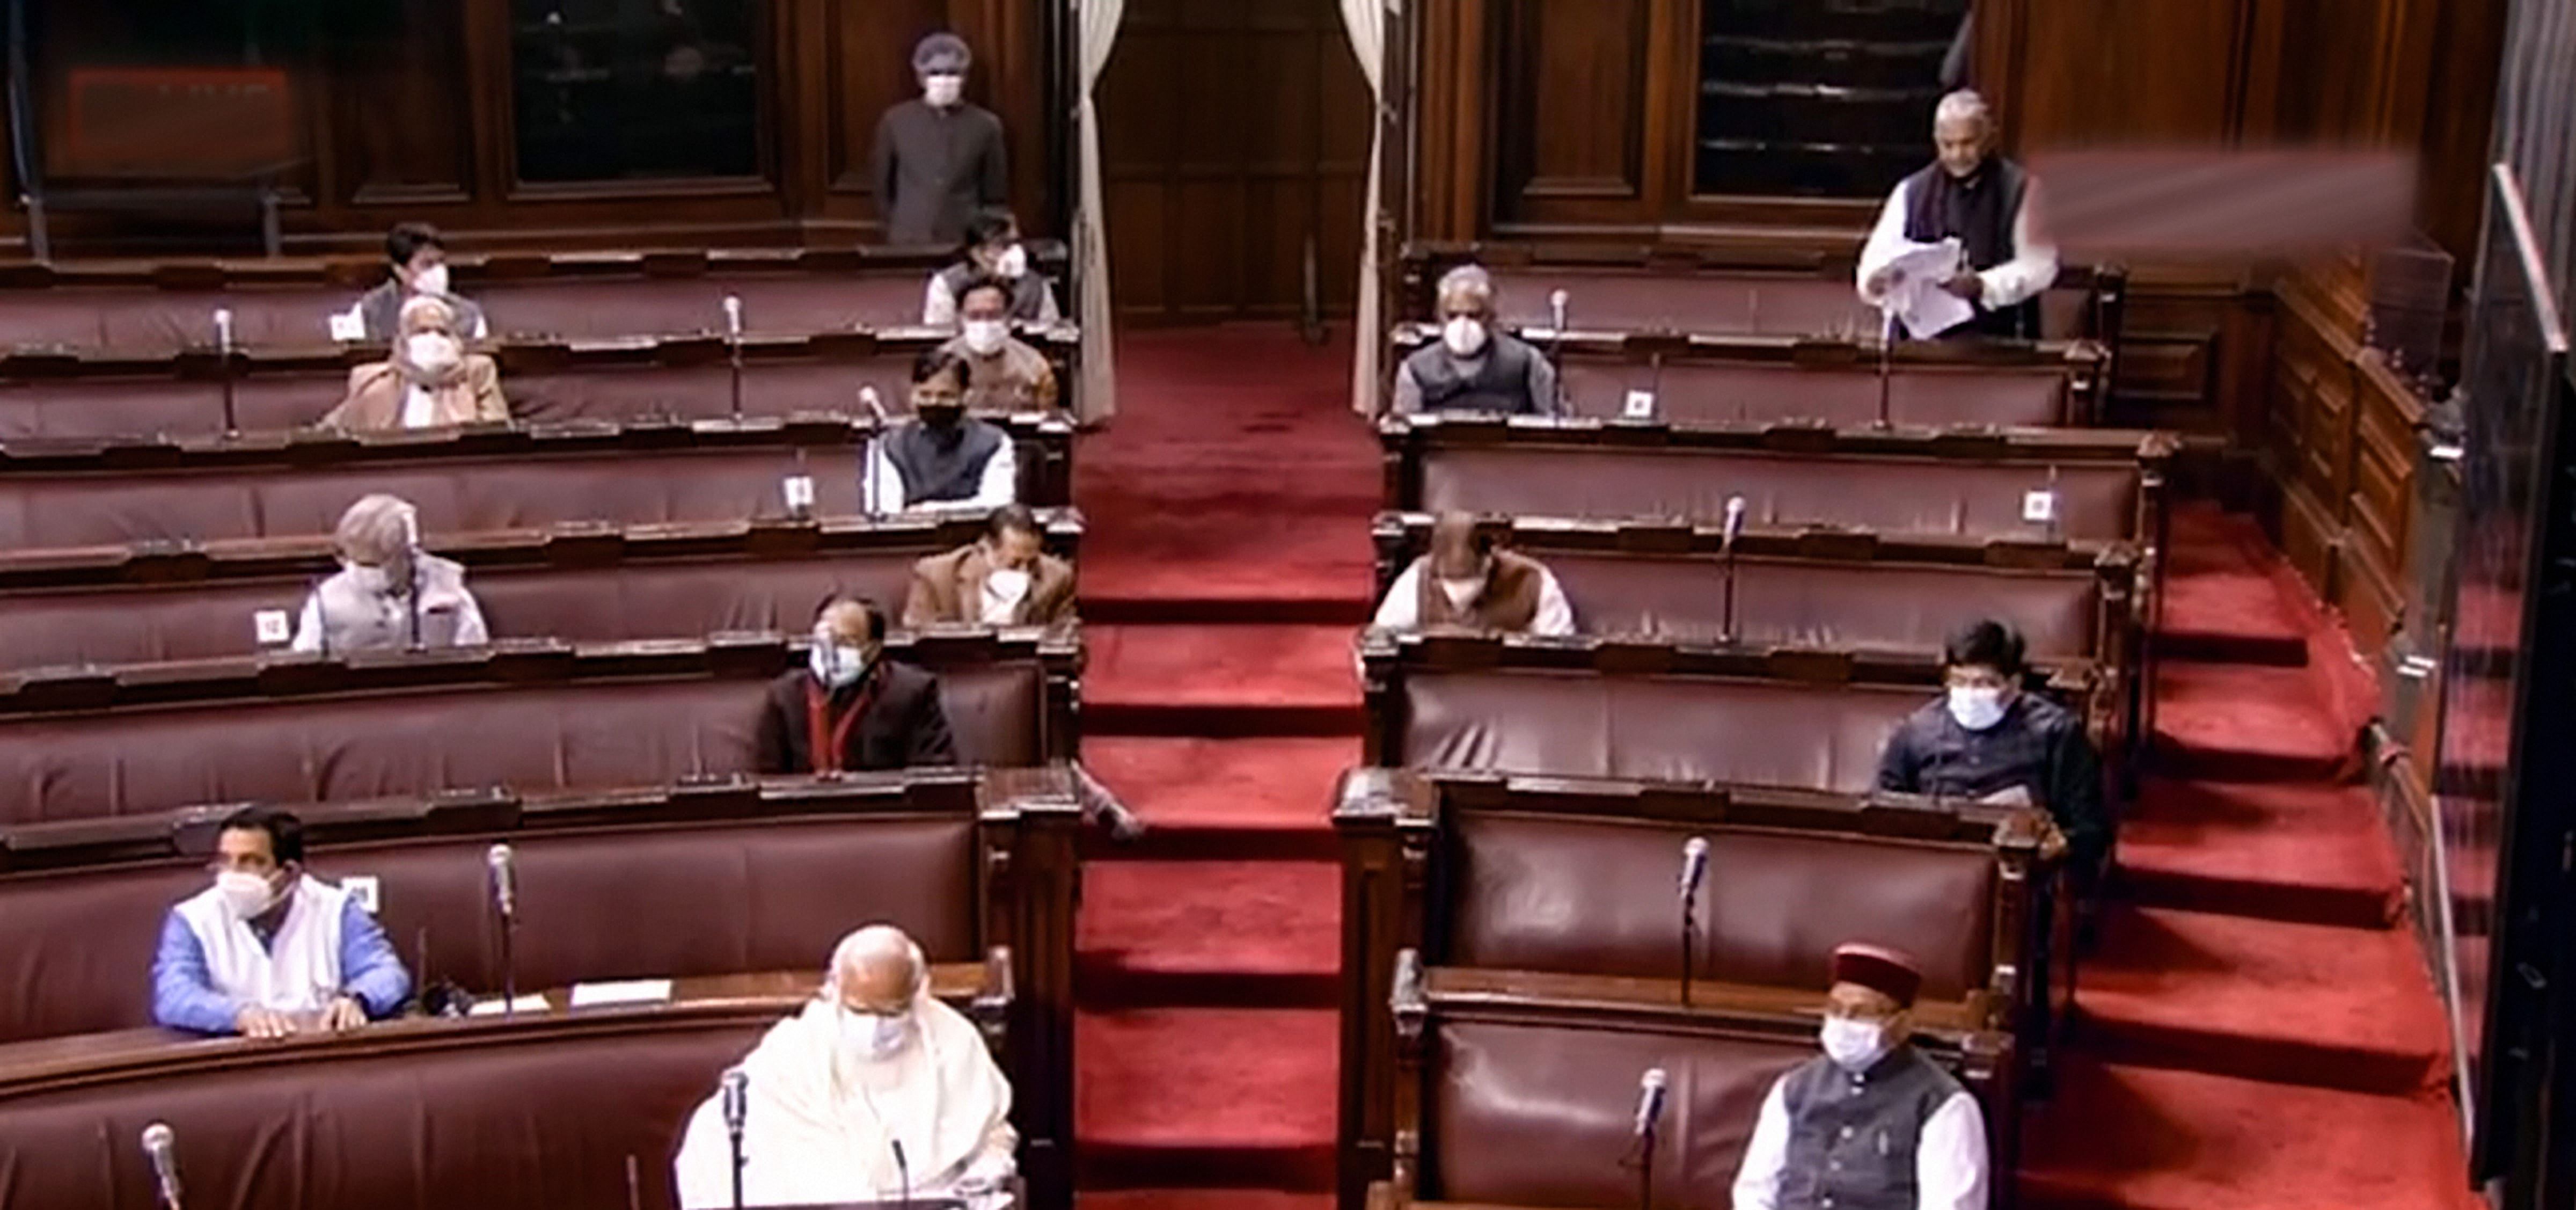 Prime Minister Narendra Modi at Rajya Sabha during the ongoing Budget Session of Parliament, in New Delhi, Wednesday, Feb. 03, 2021. Credit: RSTV Screengrab